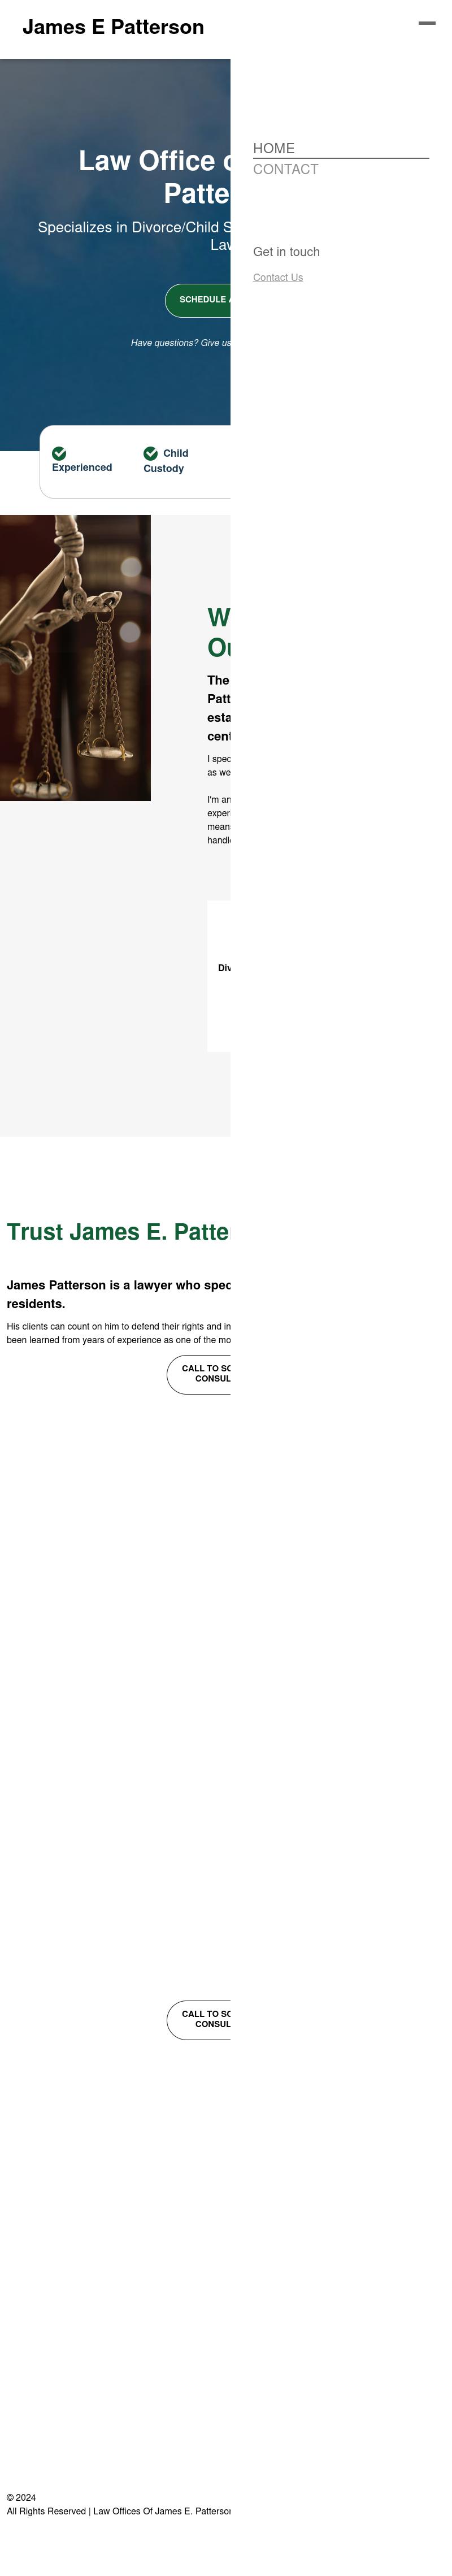 The Law Offices of James E. Patterson, P.C. - Forsyth GA Lawyers